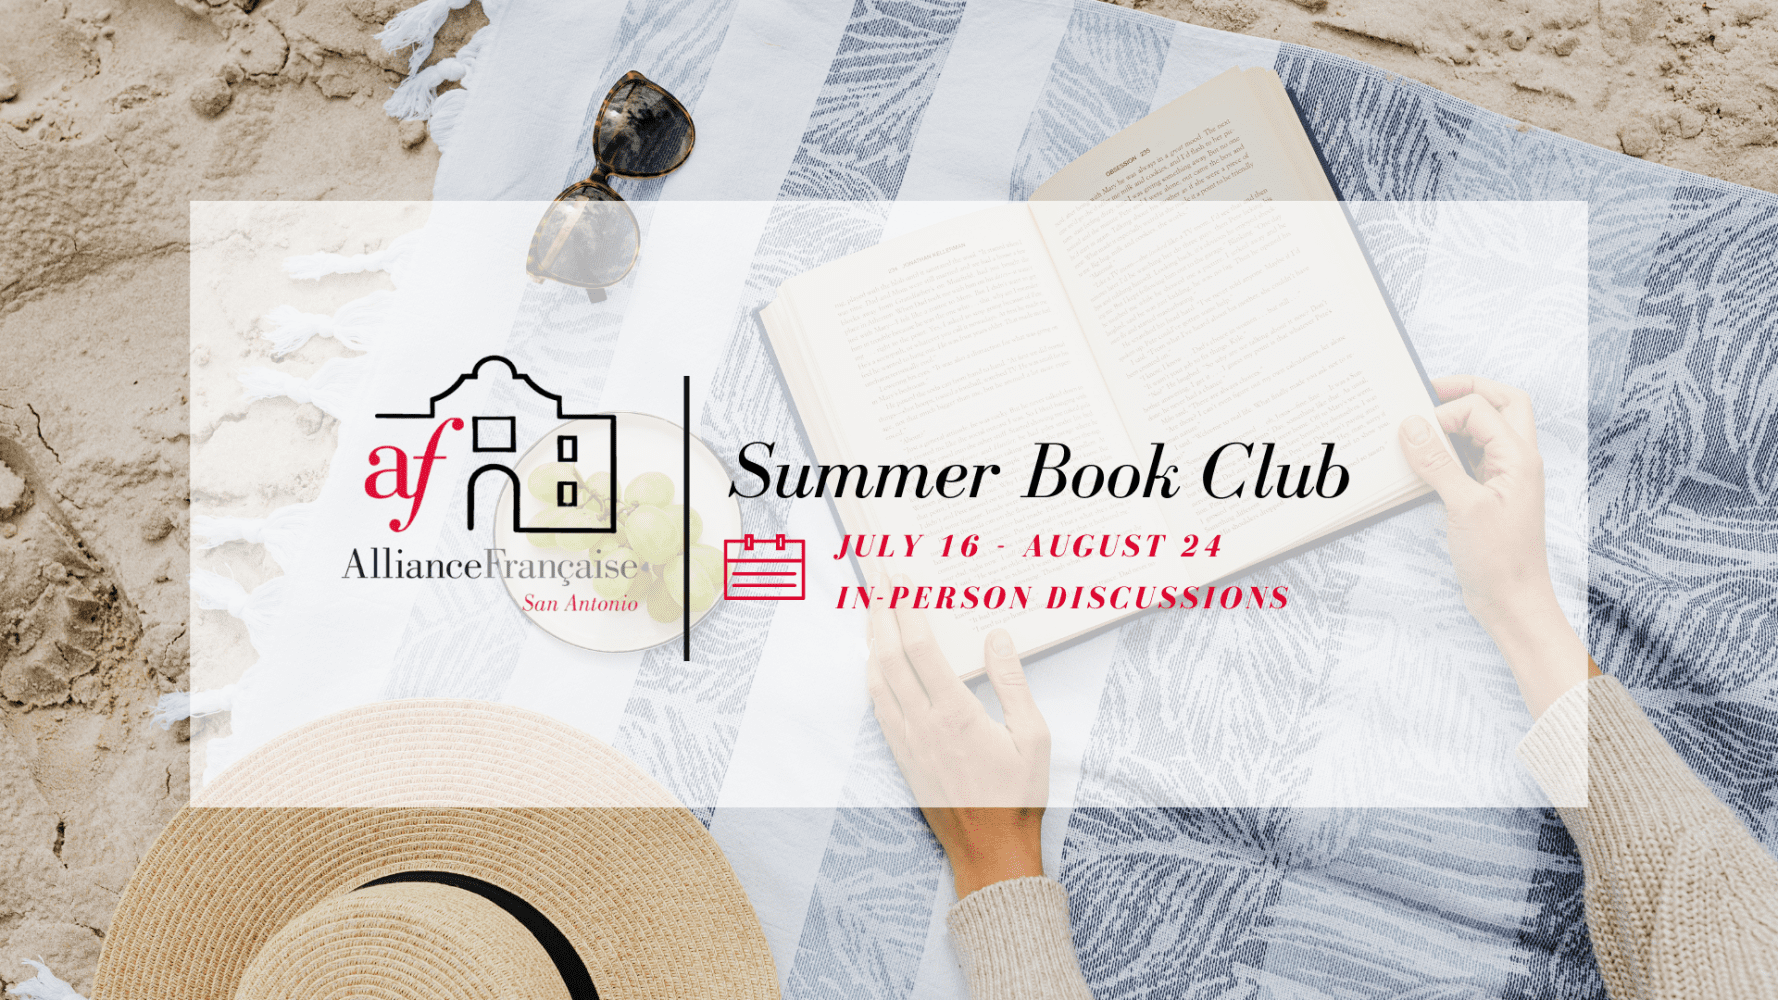 Upcoming book club discussions: Summer 2022